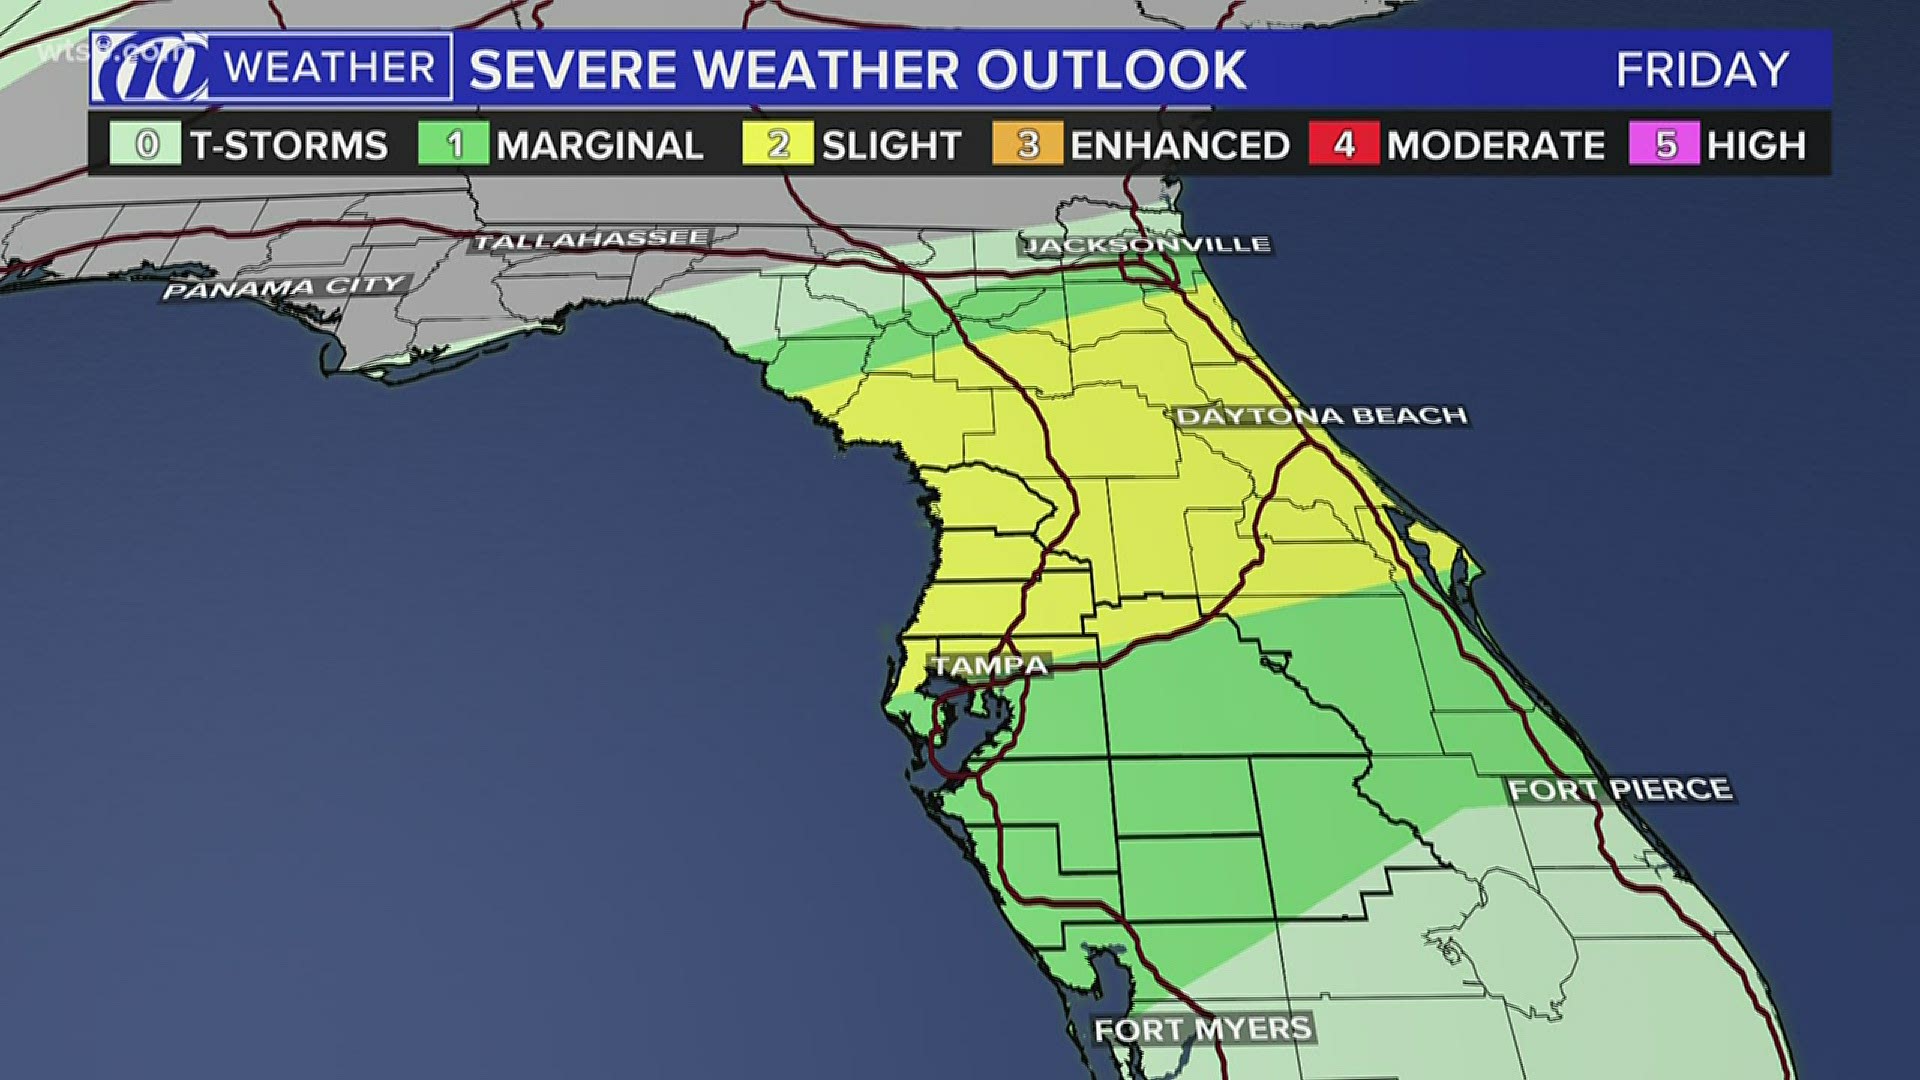 Rounds of storms, severe weather possible in Tampa Bay